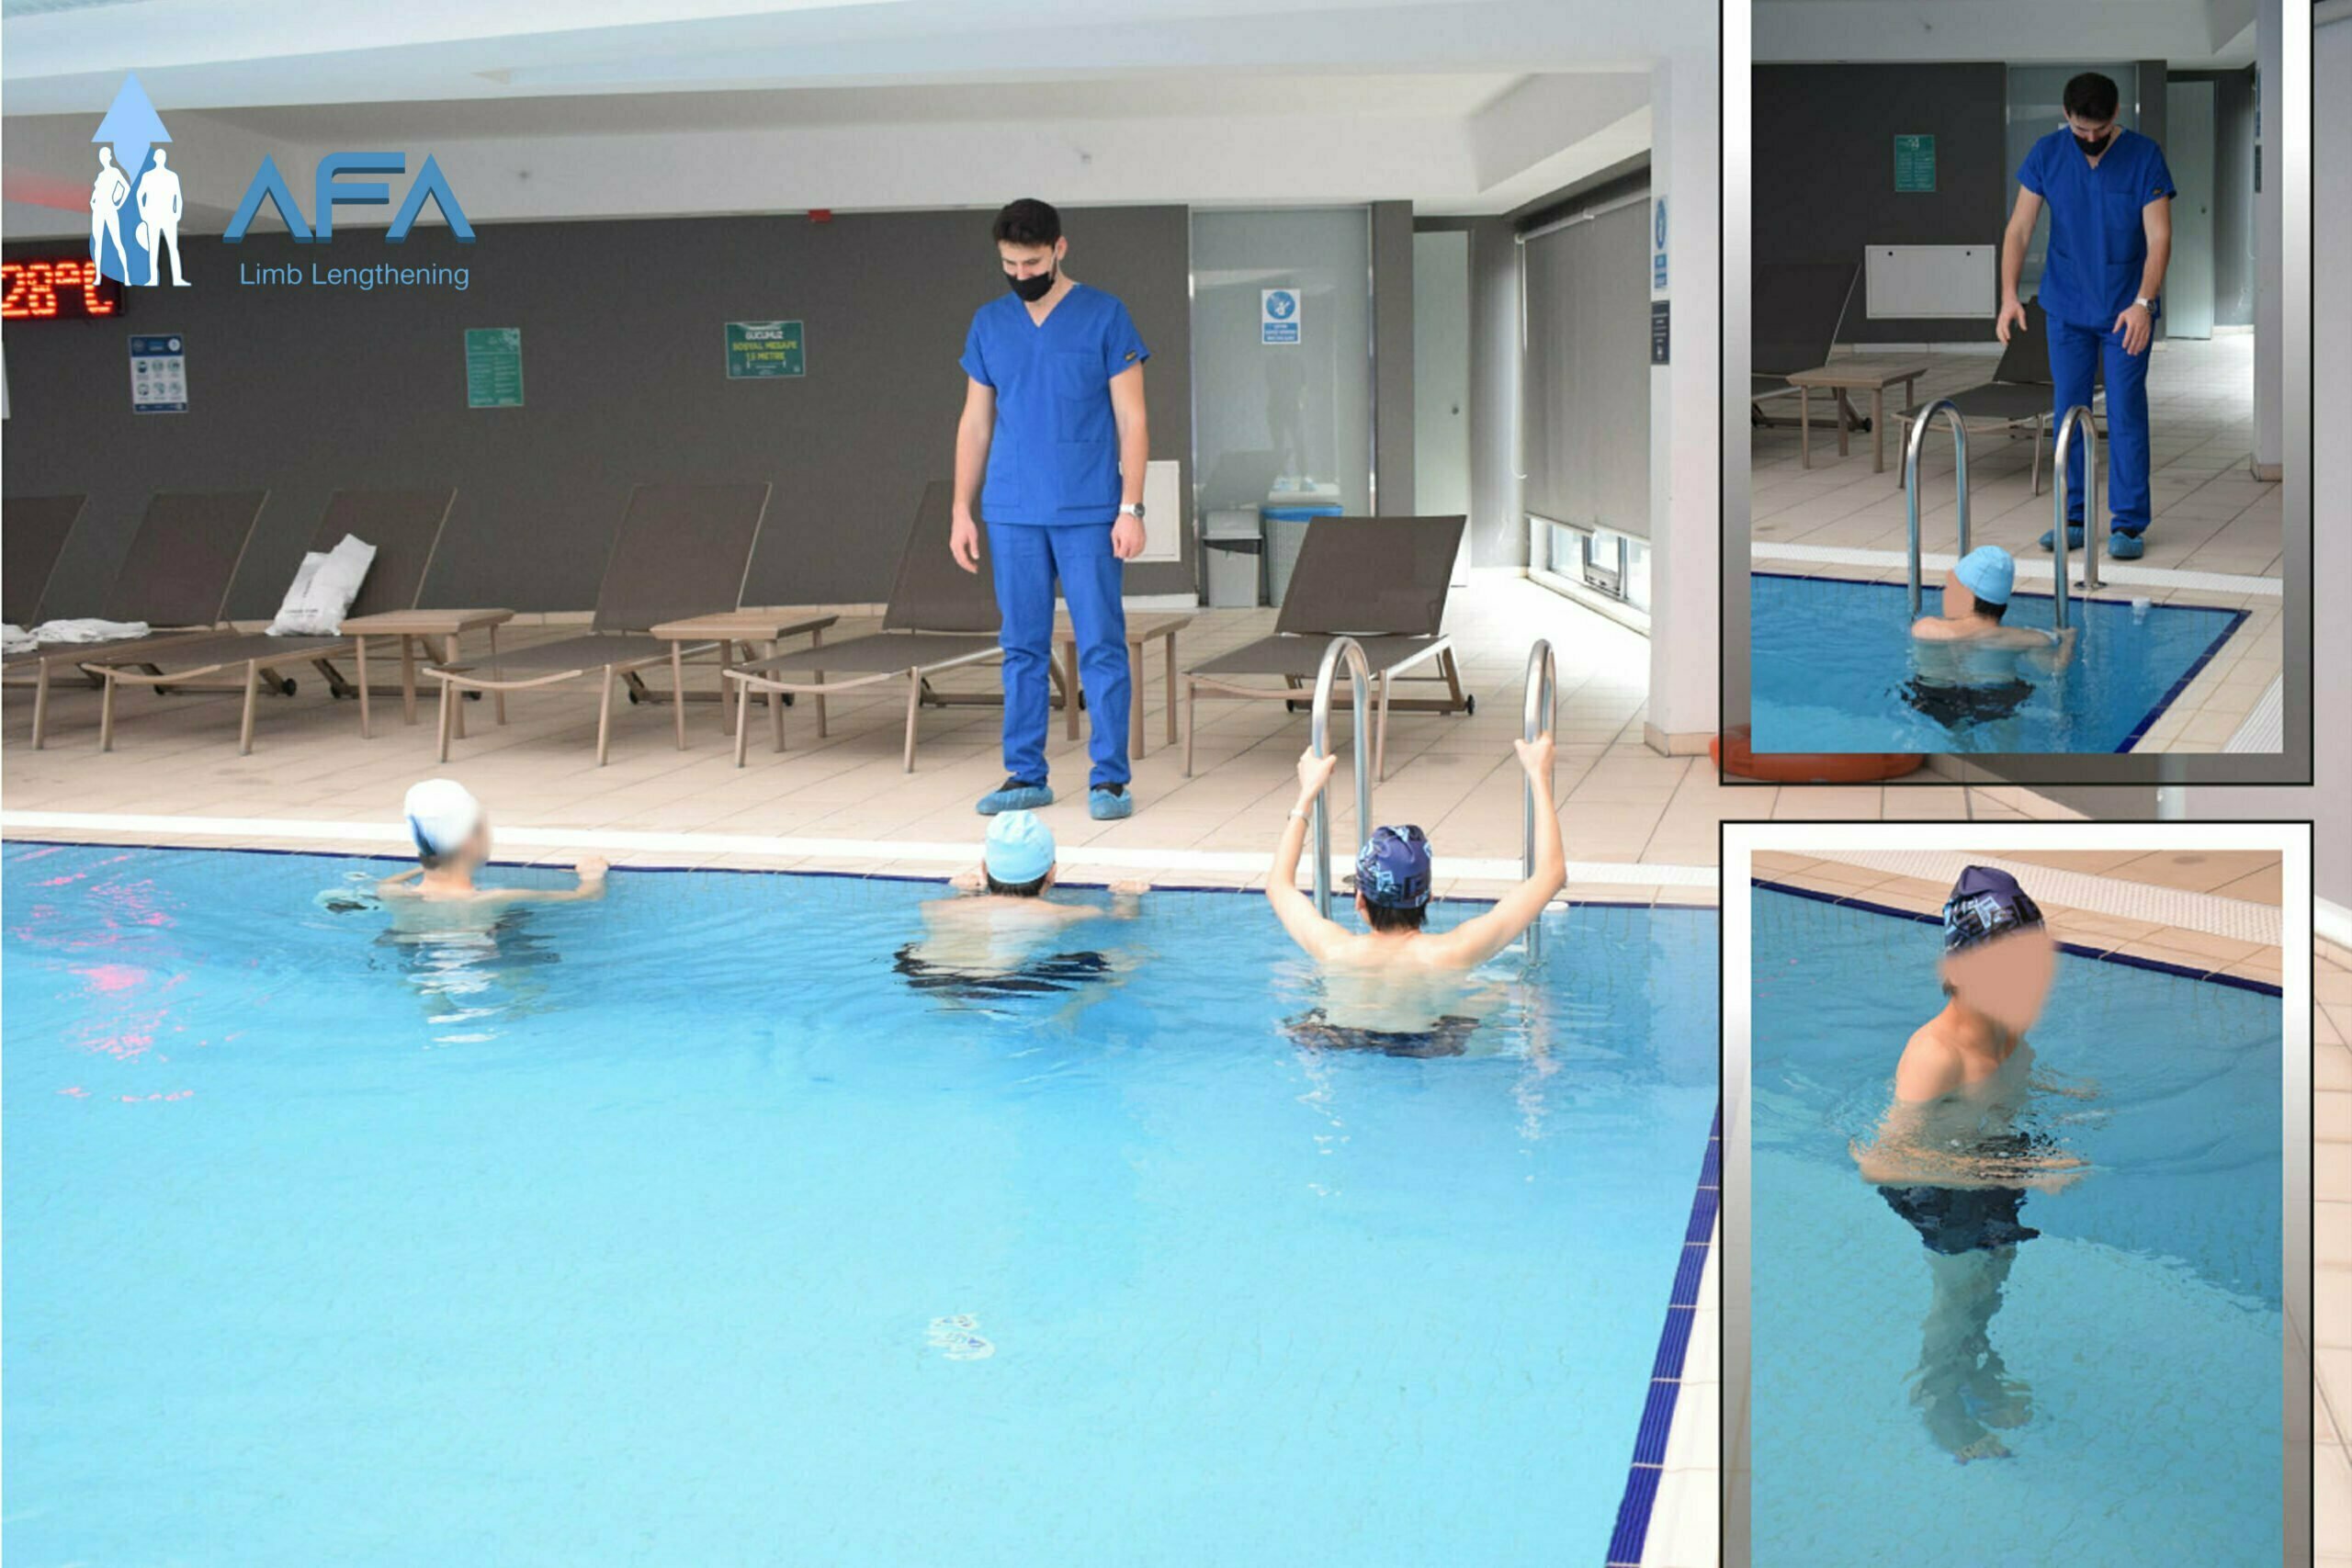 hydrotherapy after limb lengthening surgery